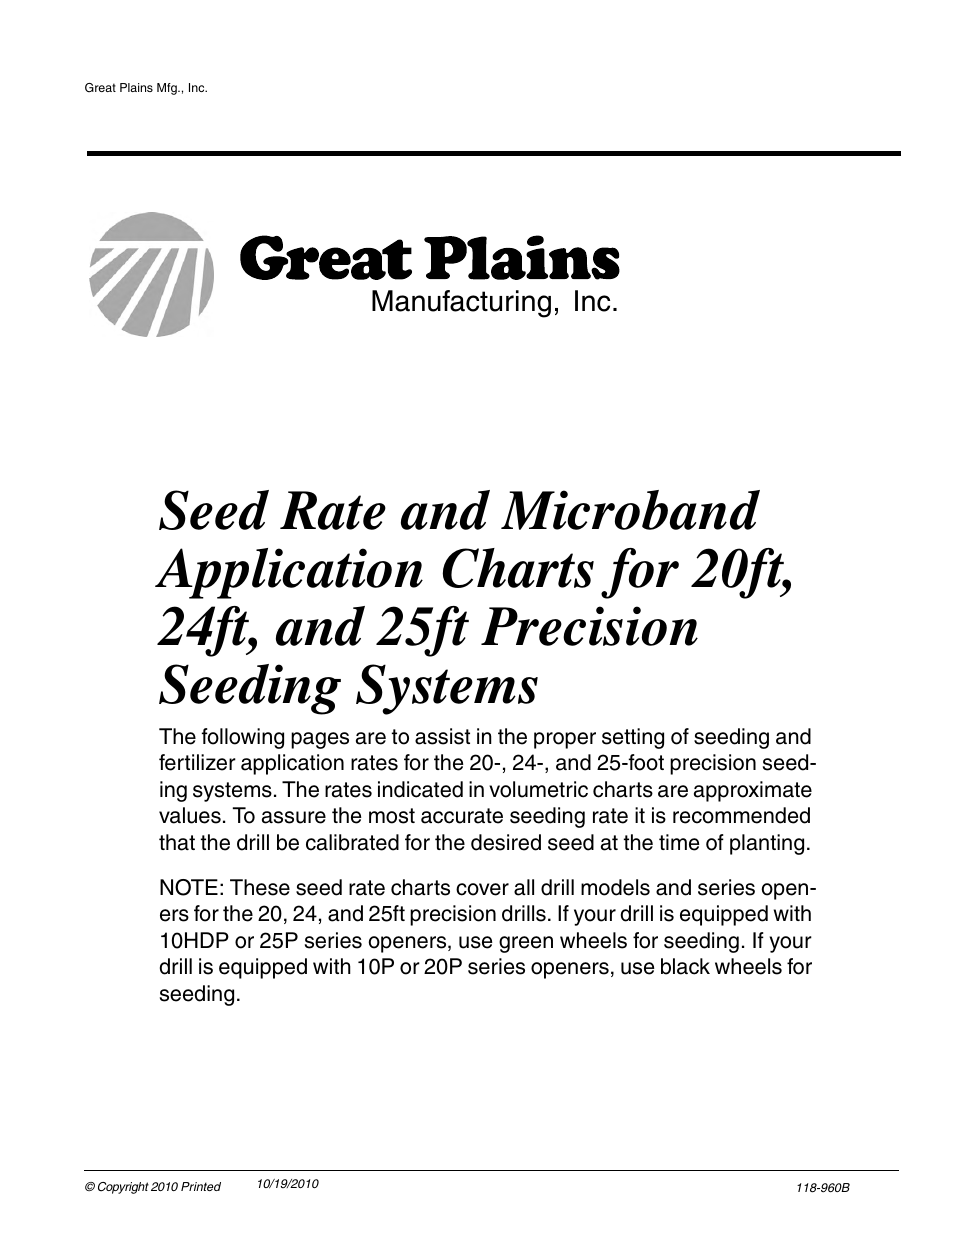 Great Plains Drill Seed Chart